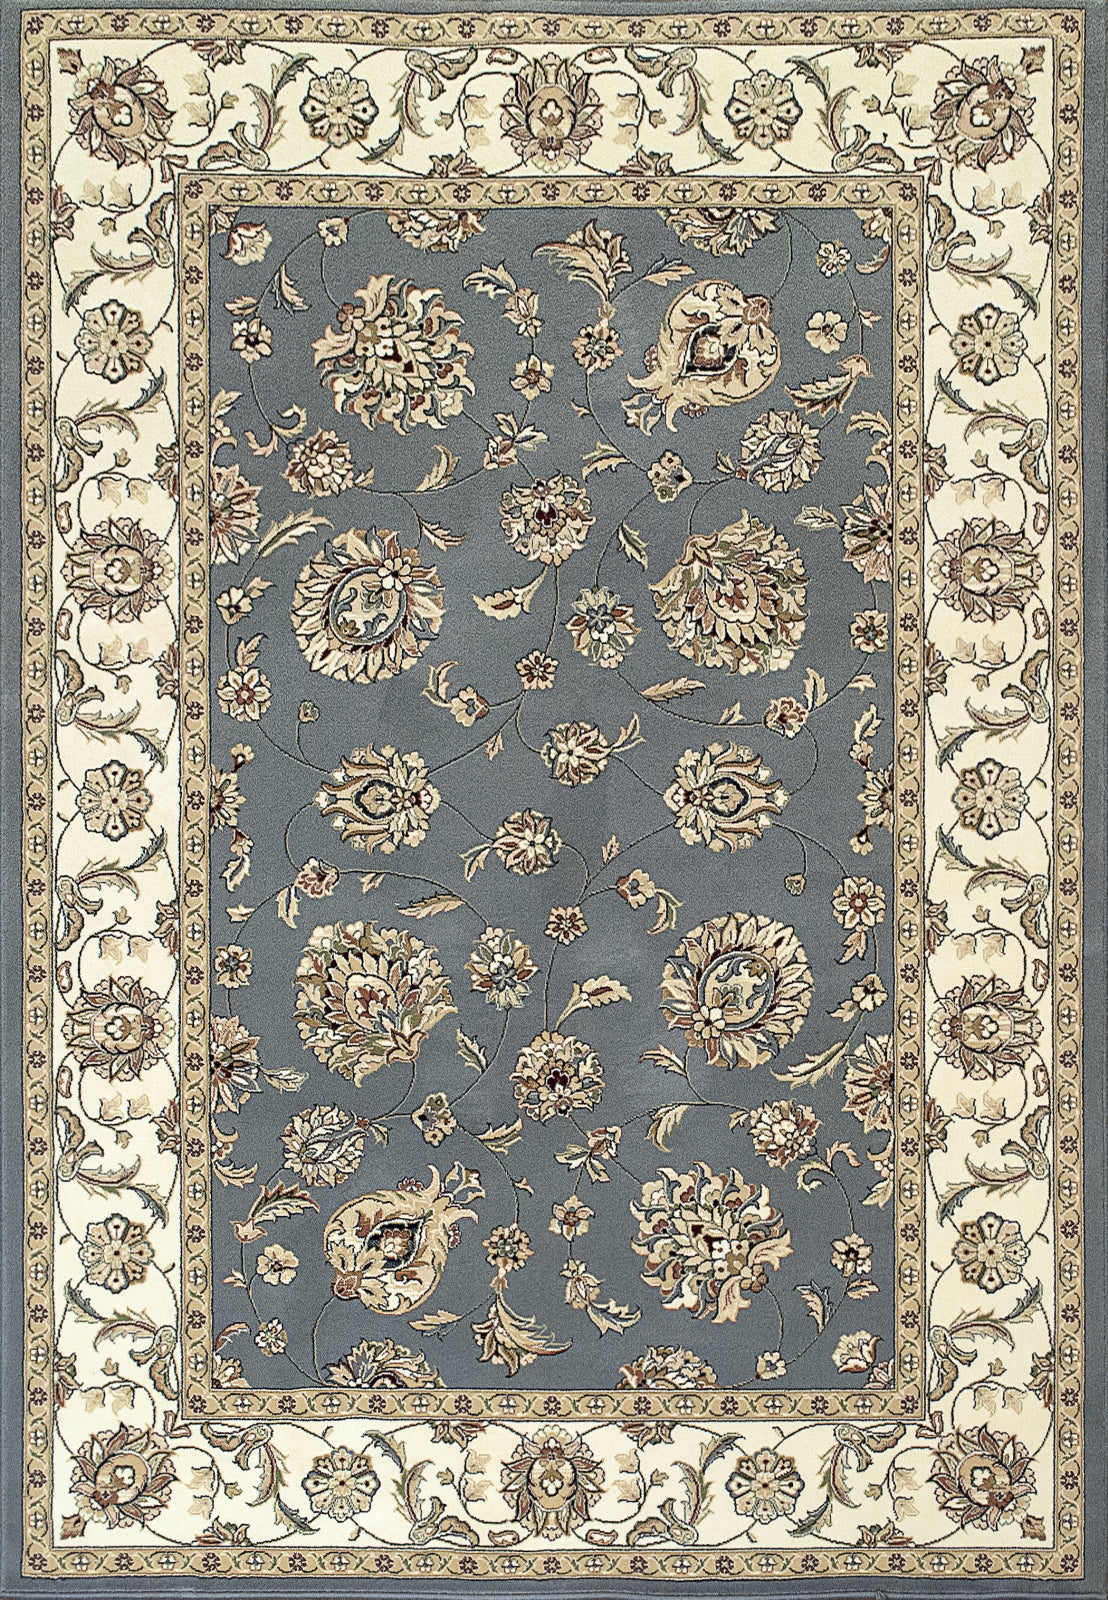 Dynamic Rugs Ancient Garden 57365 Light Blue/Ivory Area Rug main image